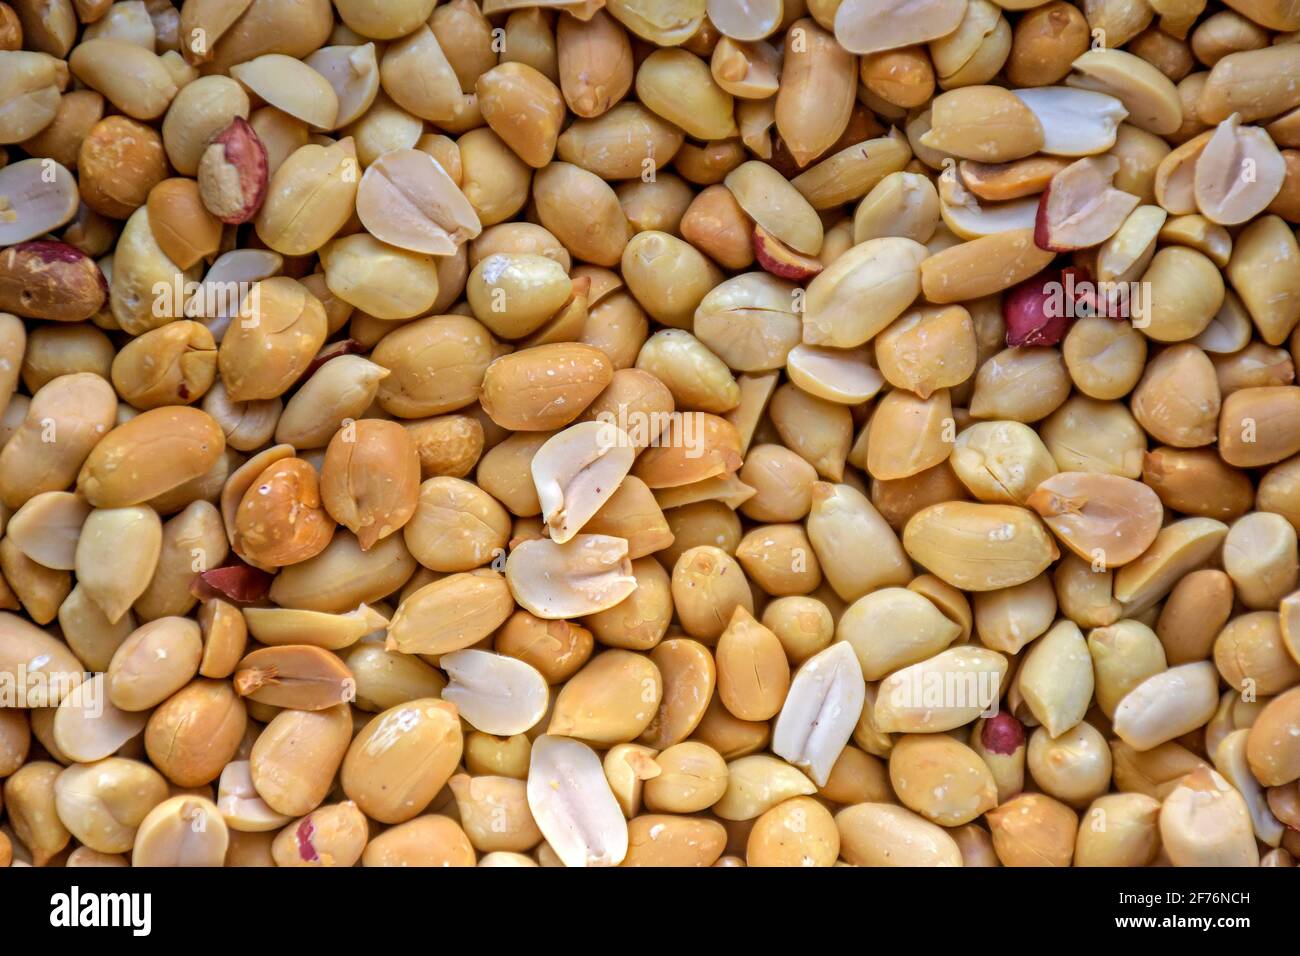 Roasted peanuts to be served as tastes like Stock Photo